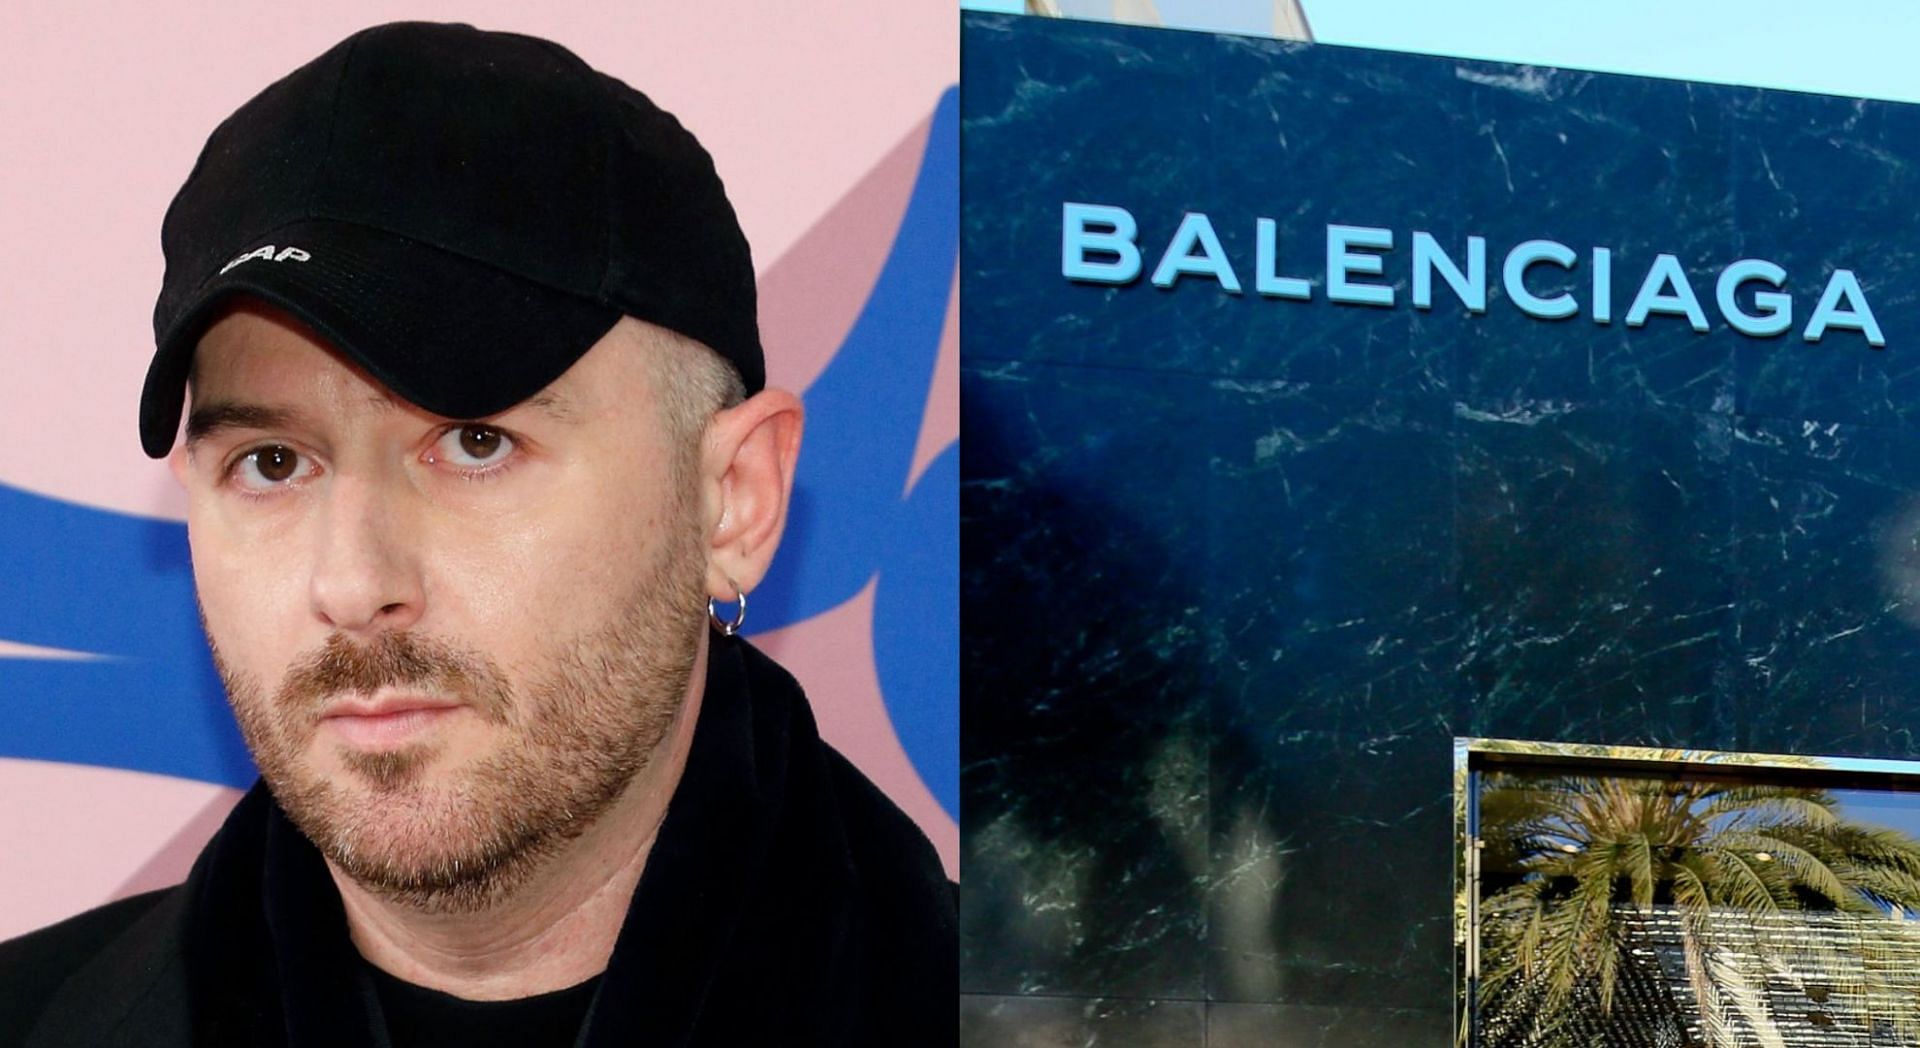 “There's no apologizing for crimes against children”: Balenciaga creative director Demna issues apology, leaves internet unconvinced 